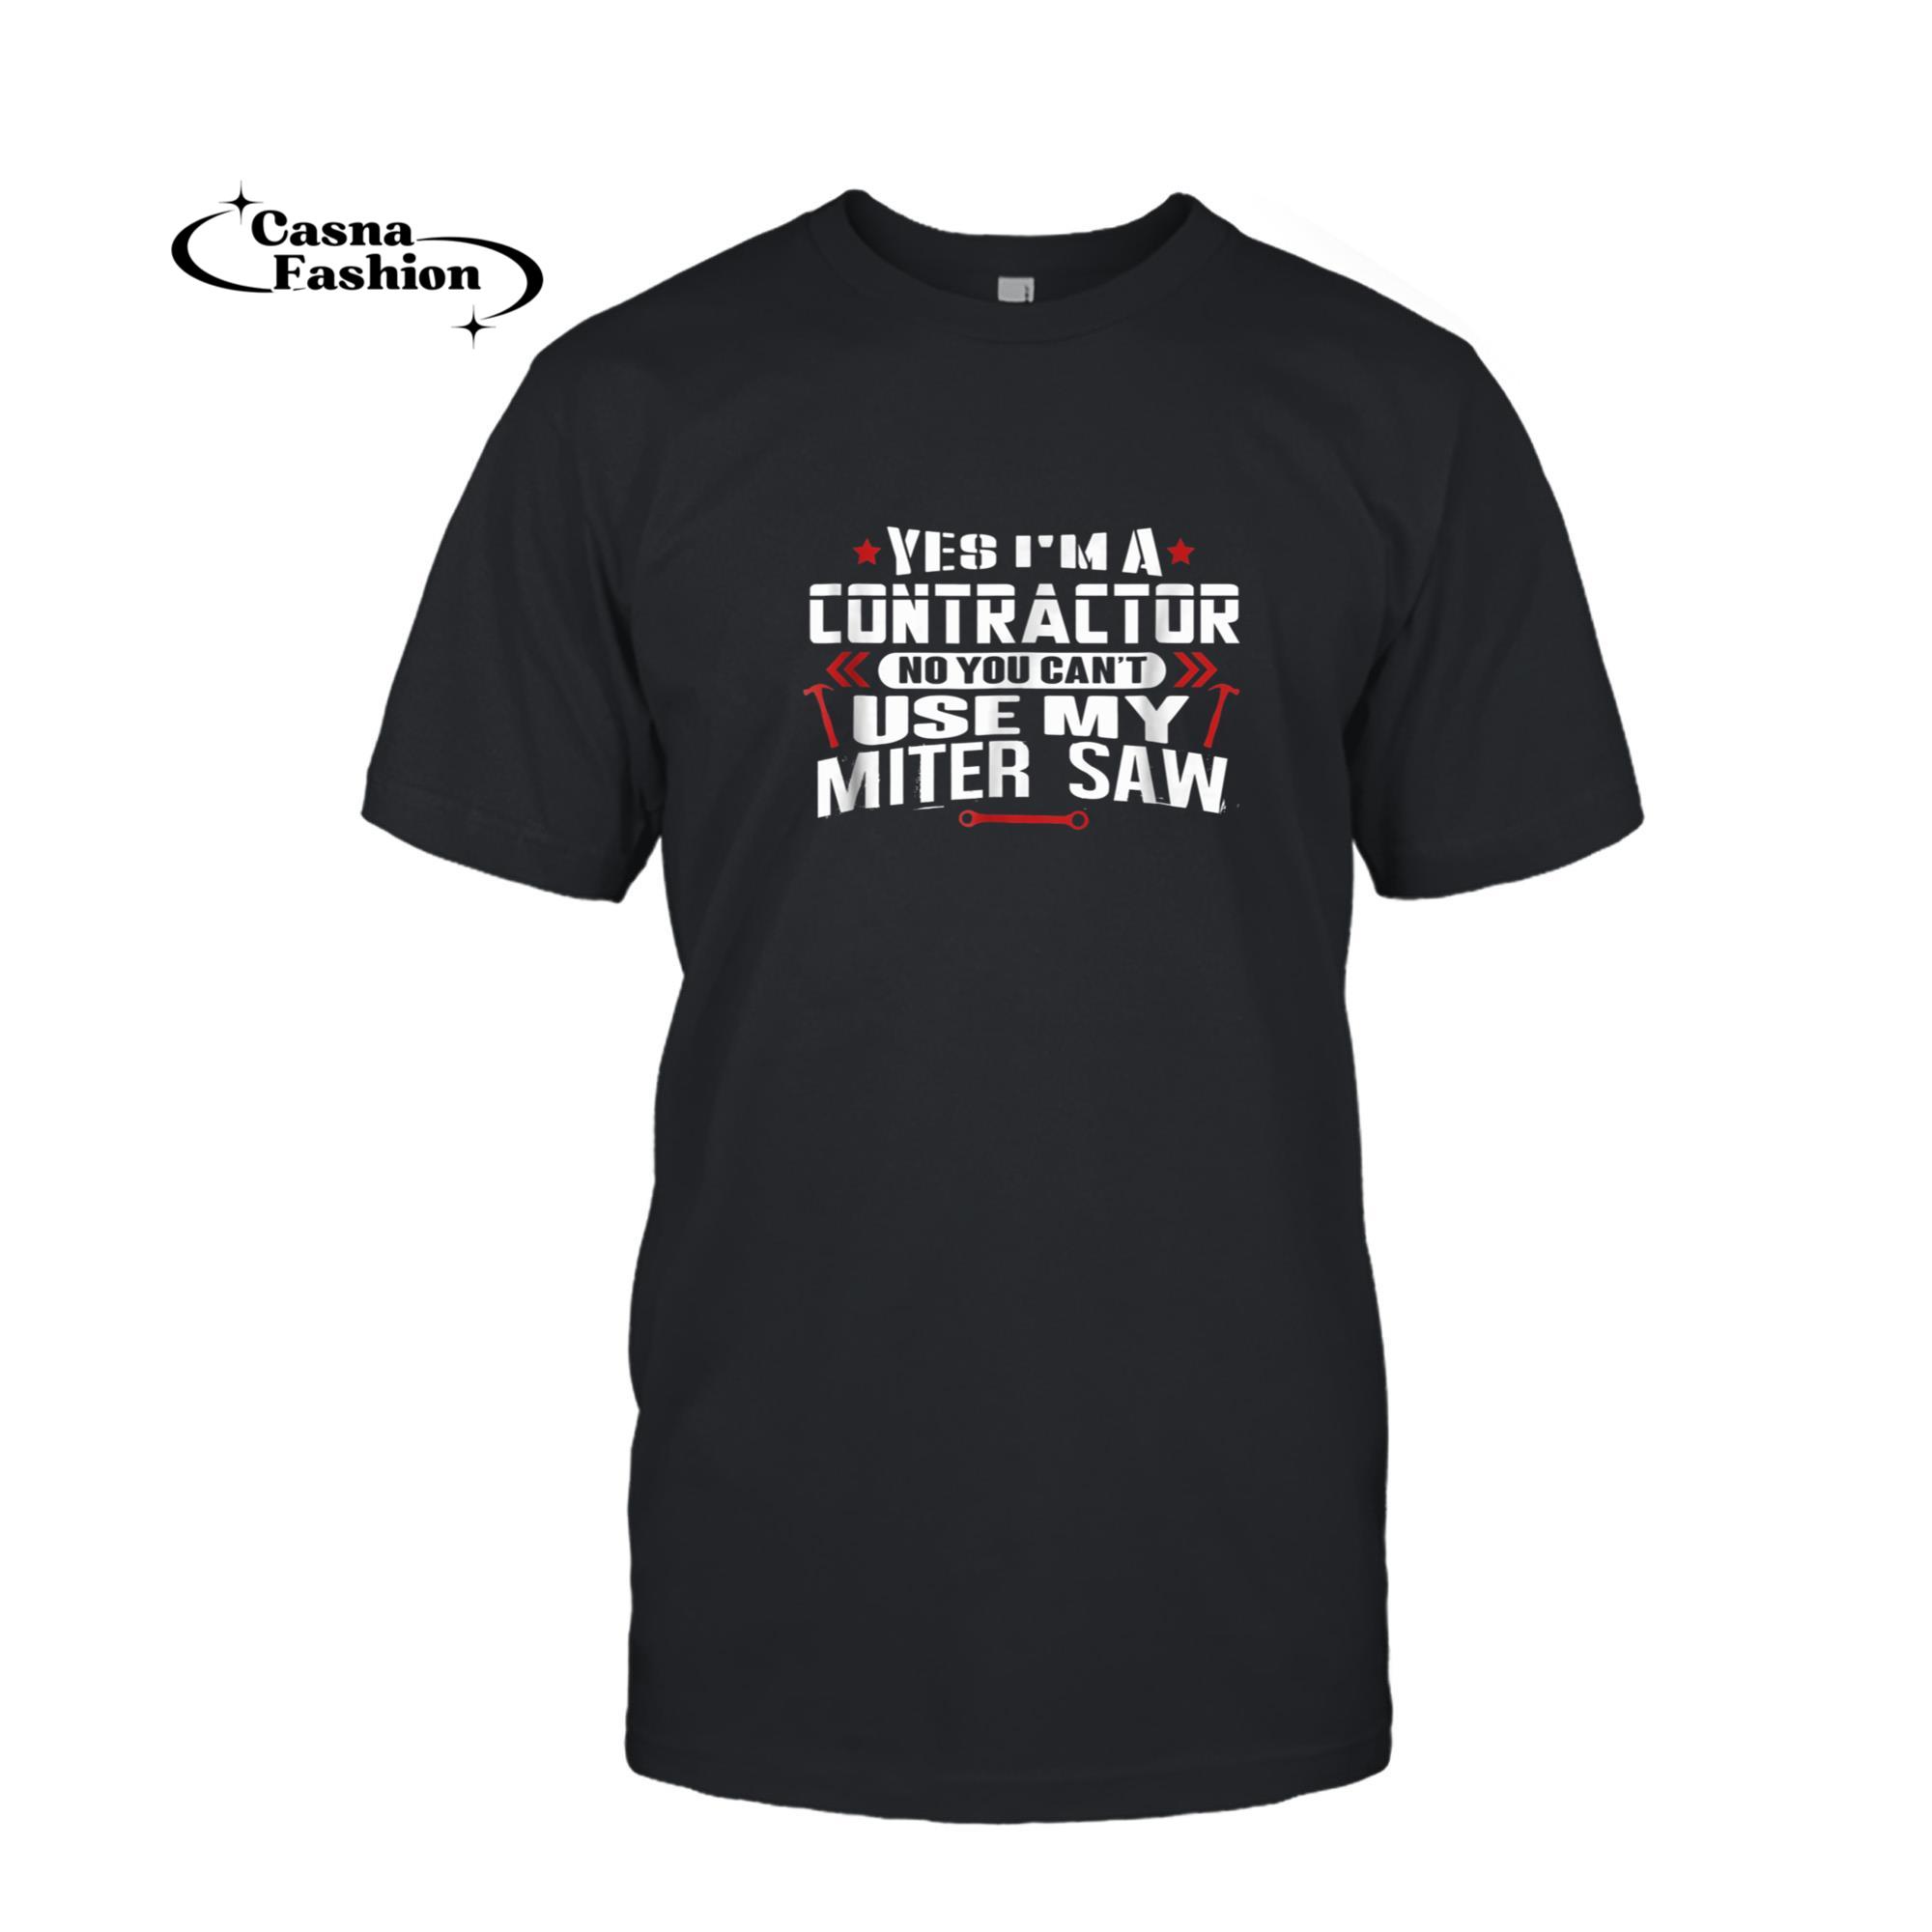 casnafashion_T-shirt_Yes, I'm A Contractor Funny Contractors Tools T Shirts Gifts_T-shirt_Black